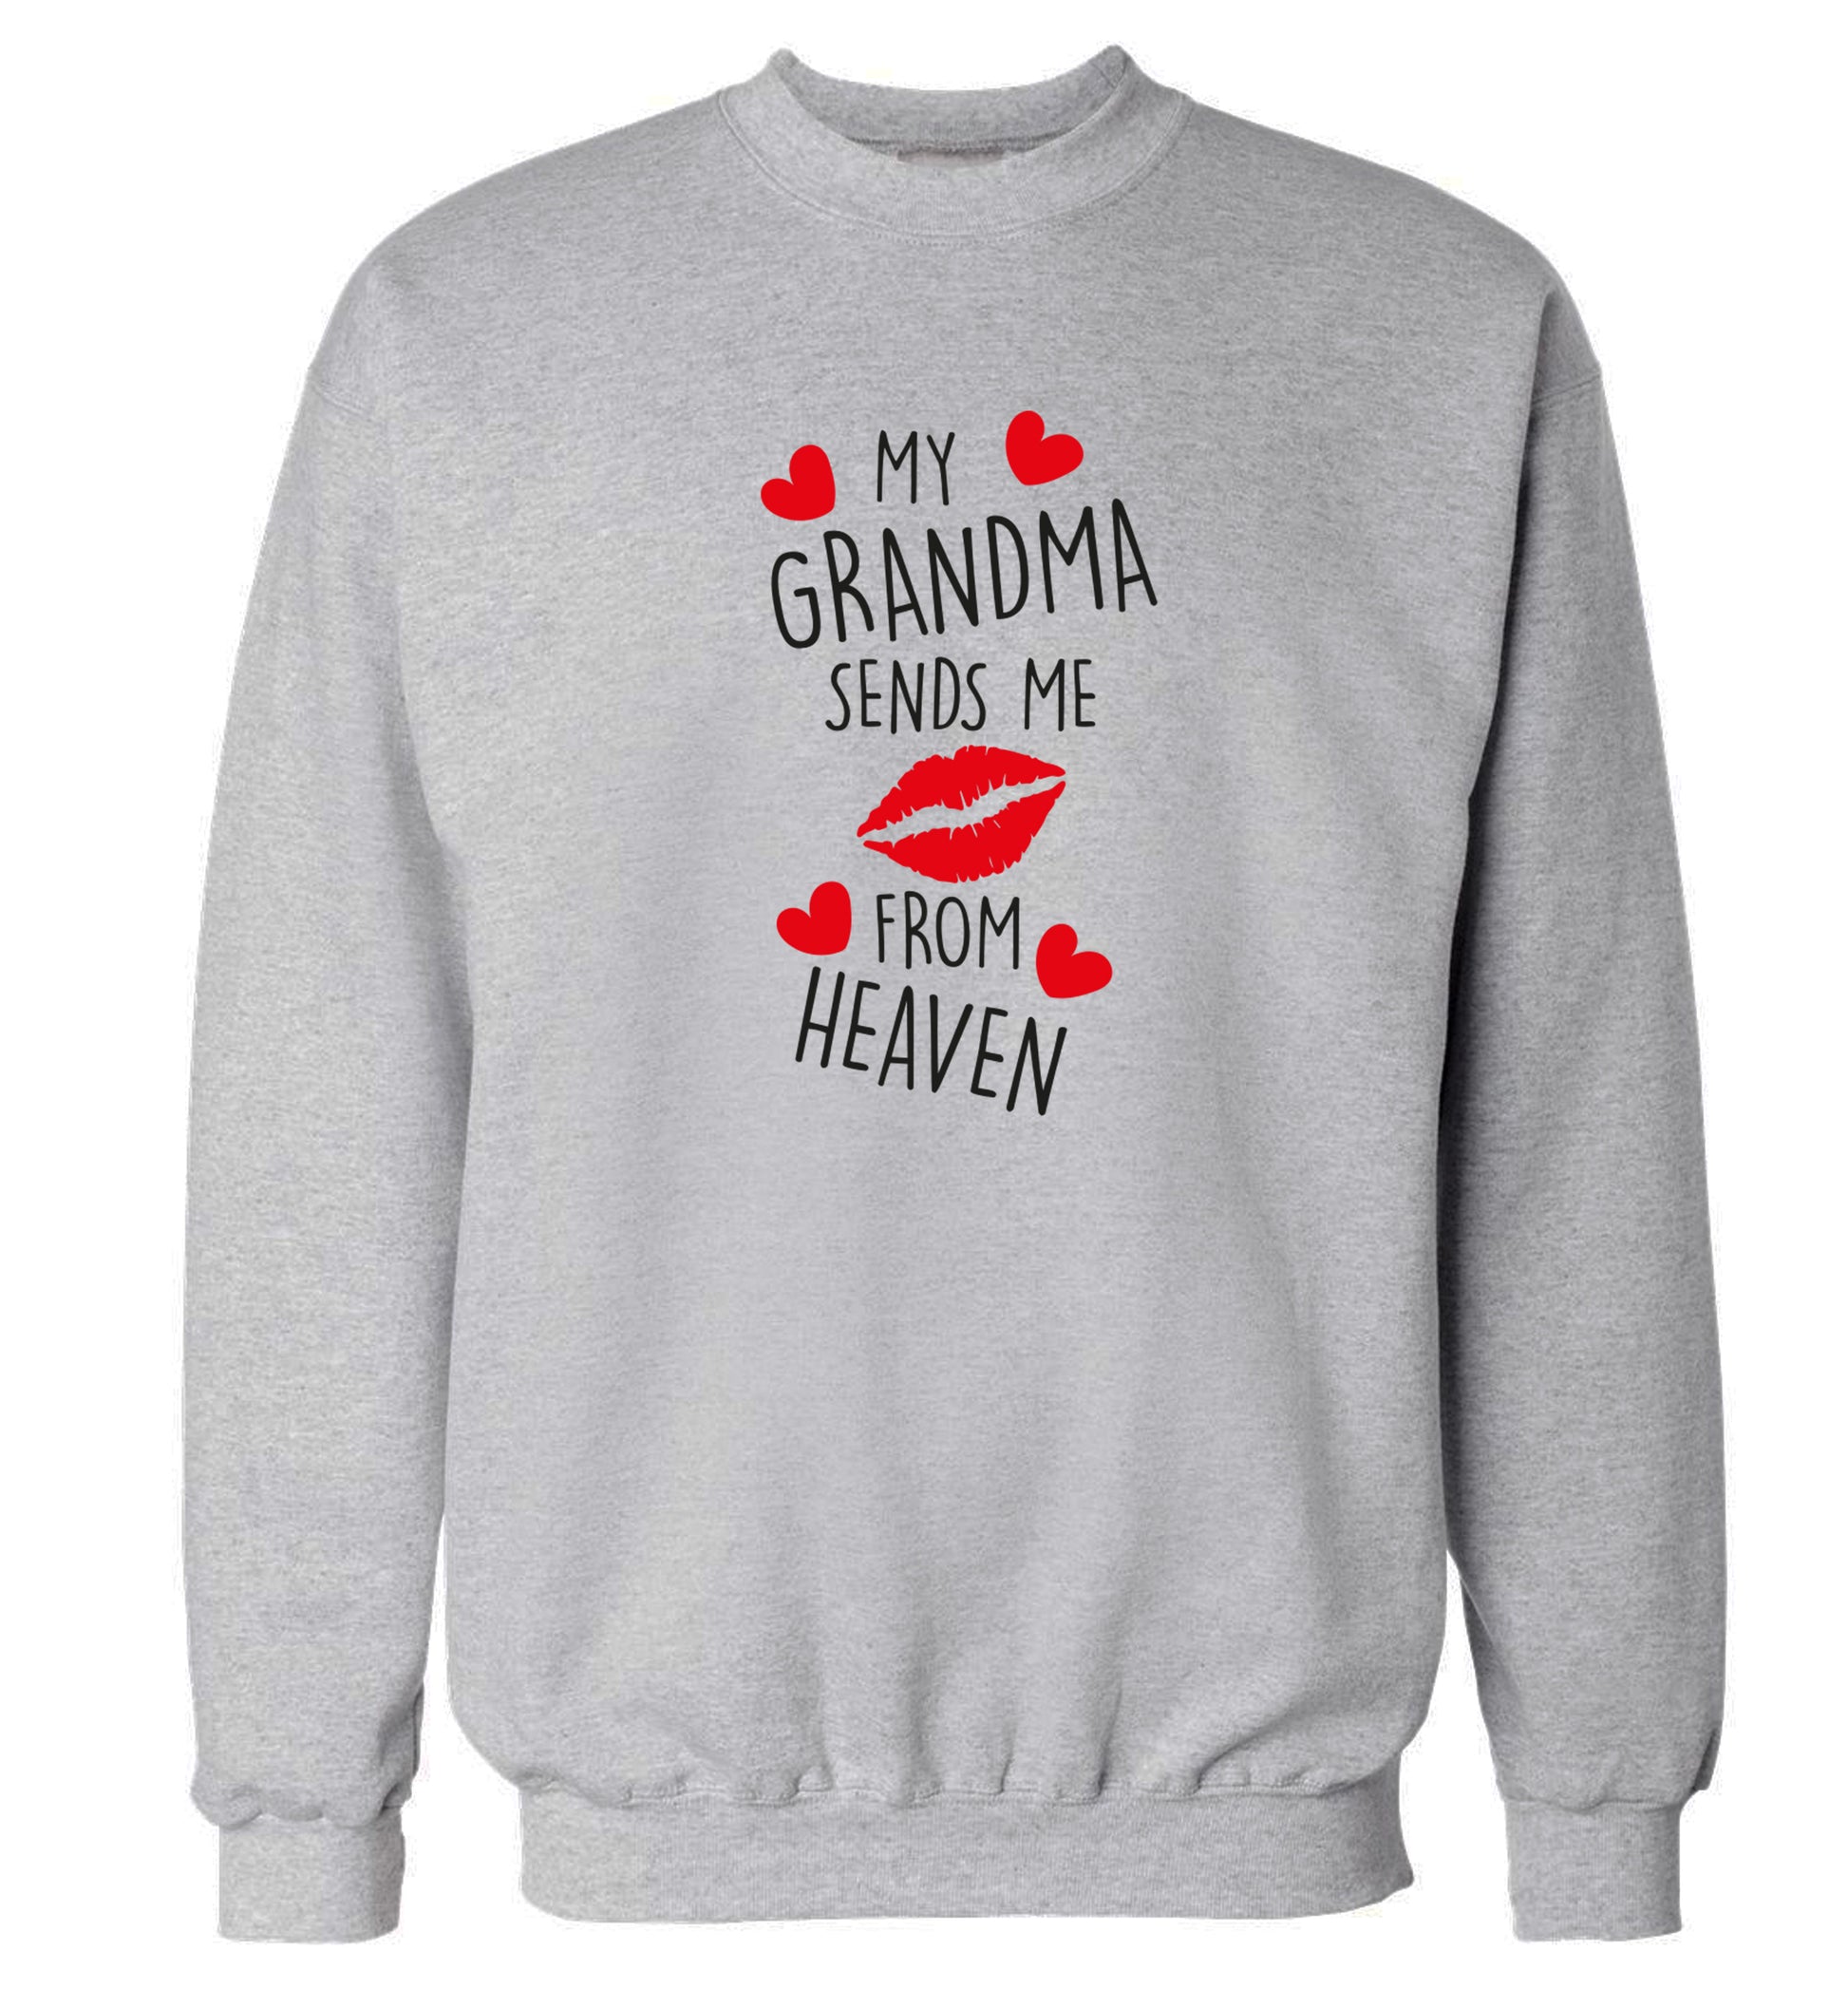 My grandma sends me kisses from heaven Adult's unisex grey Sweater 2XL